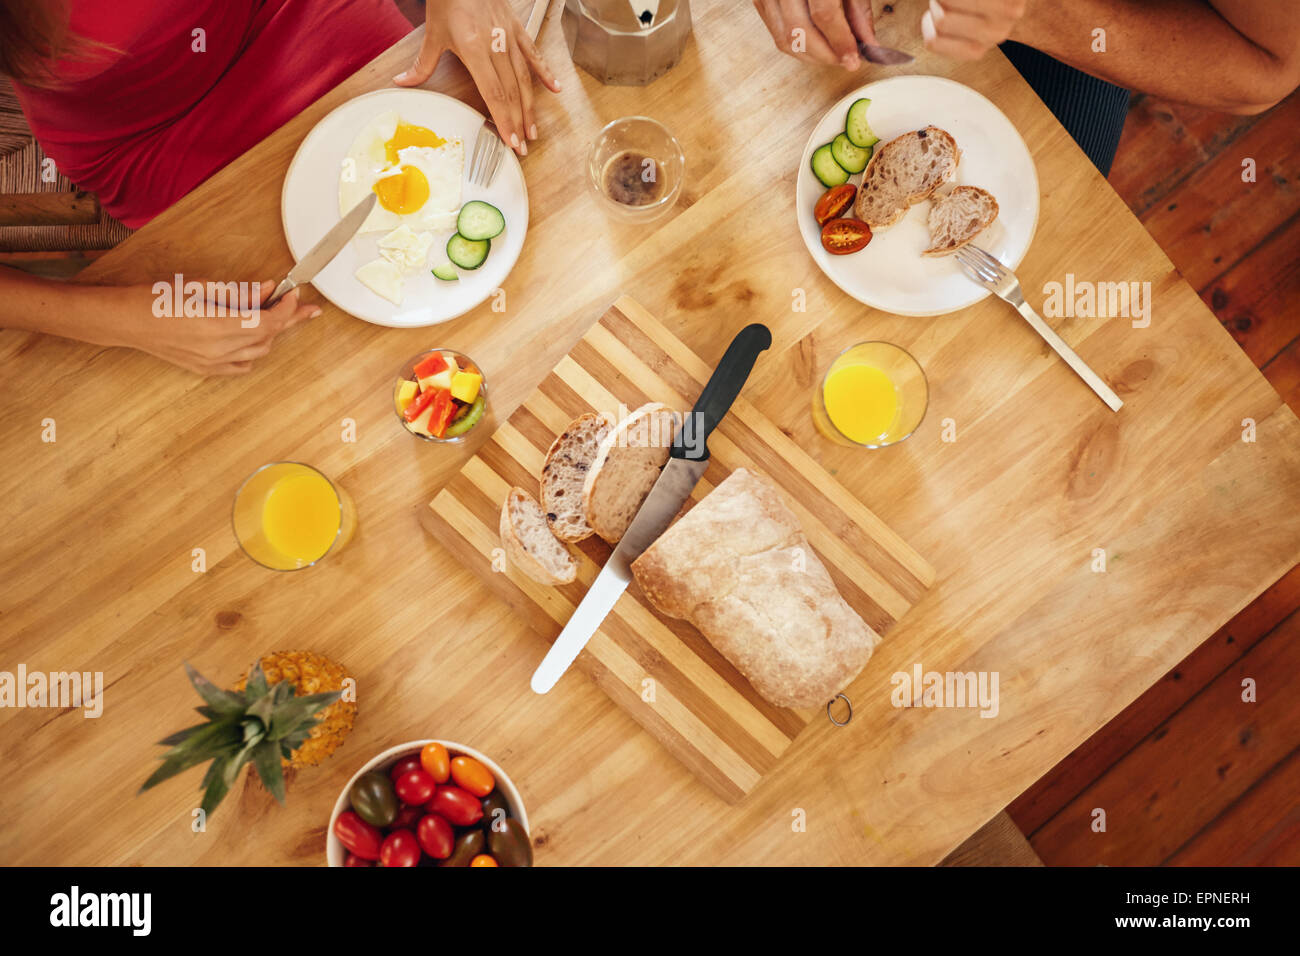 Top view of couple eating a healthy morning breakfast at home. Breakfast table with loaf of bread on cutting board, fruits, juic Stock Photo